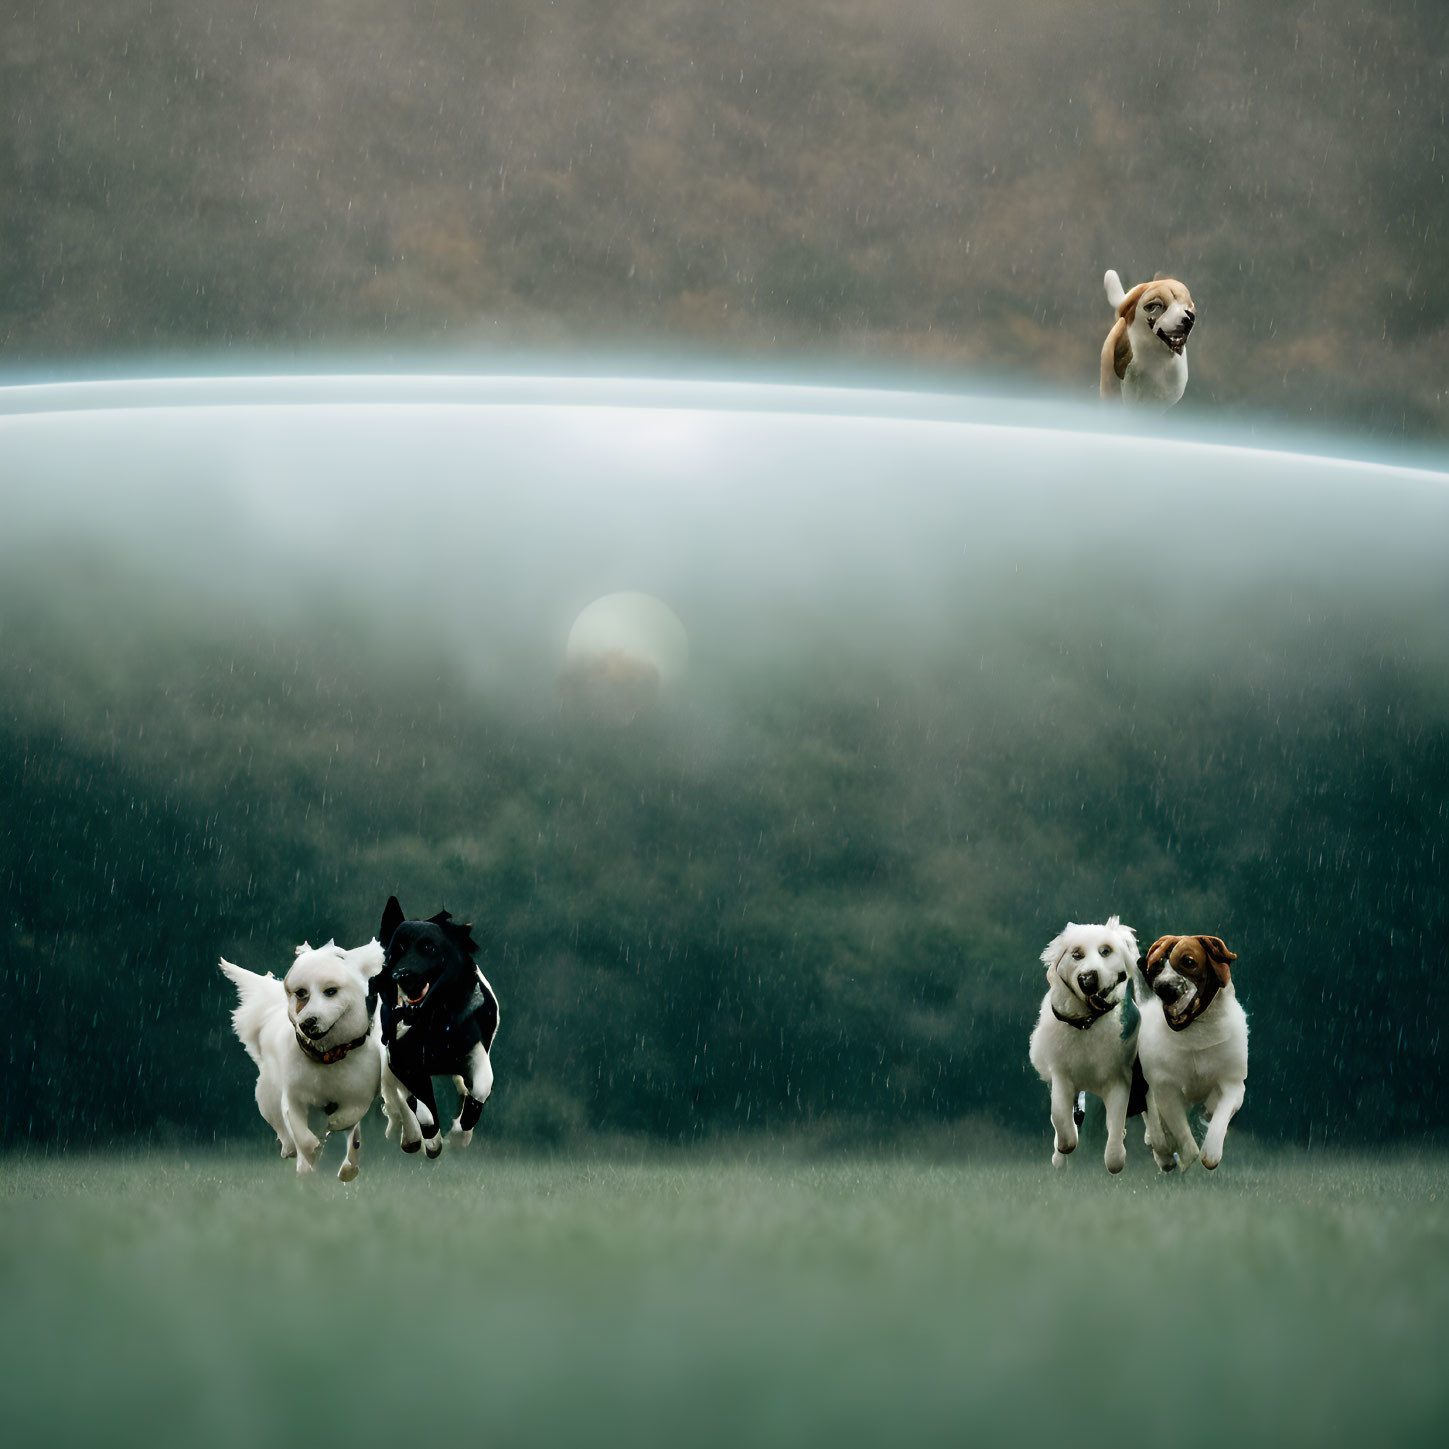 Four Dogs Playing in Surreal Field with Mysterious Object